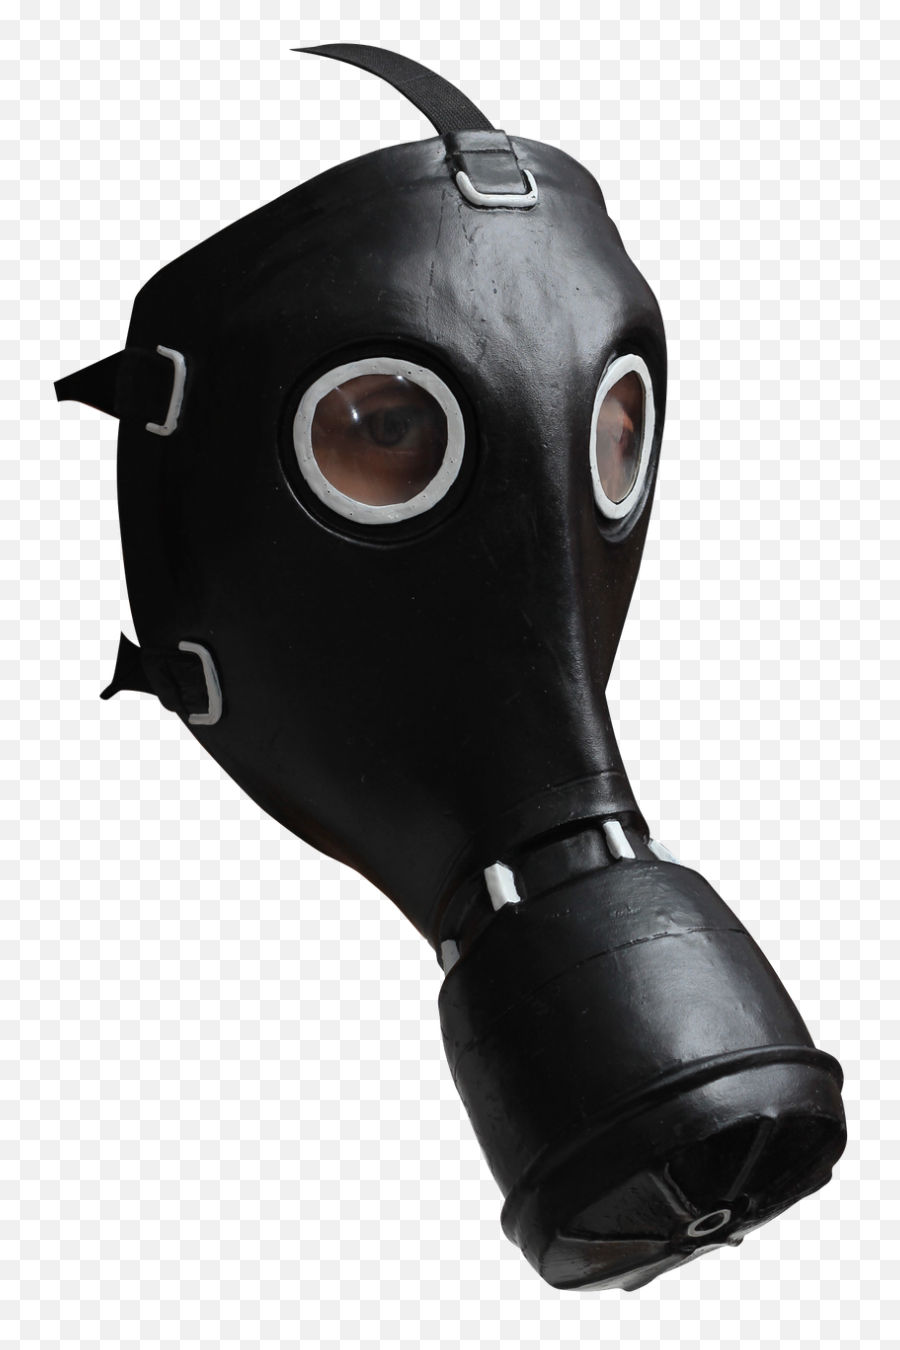 Freaky Findz - Halloween Costume Gas Mask Png,Gas Mask Transparent